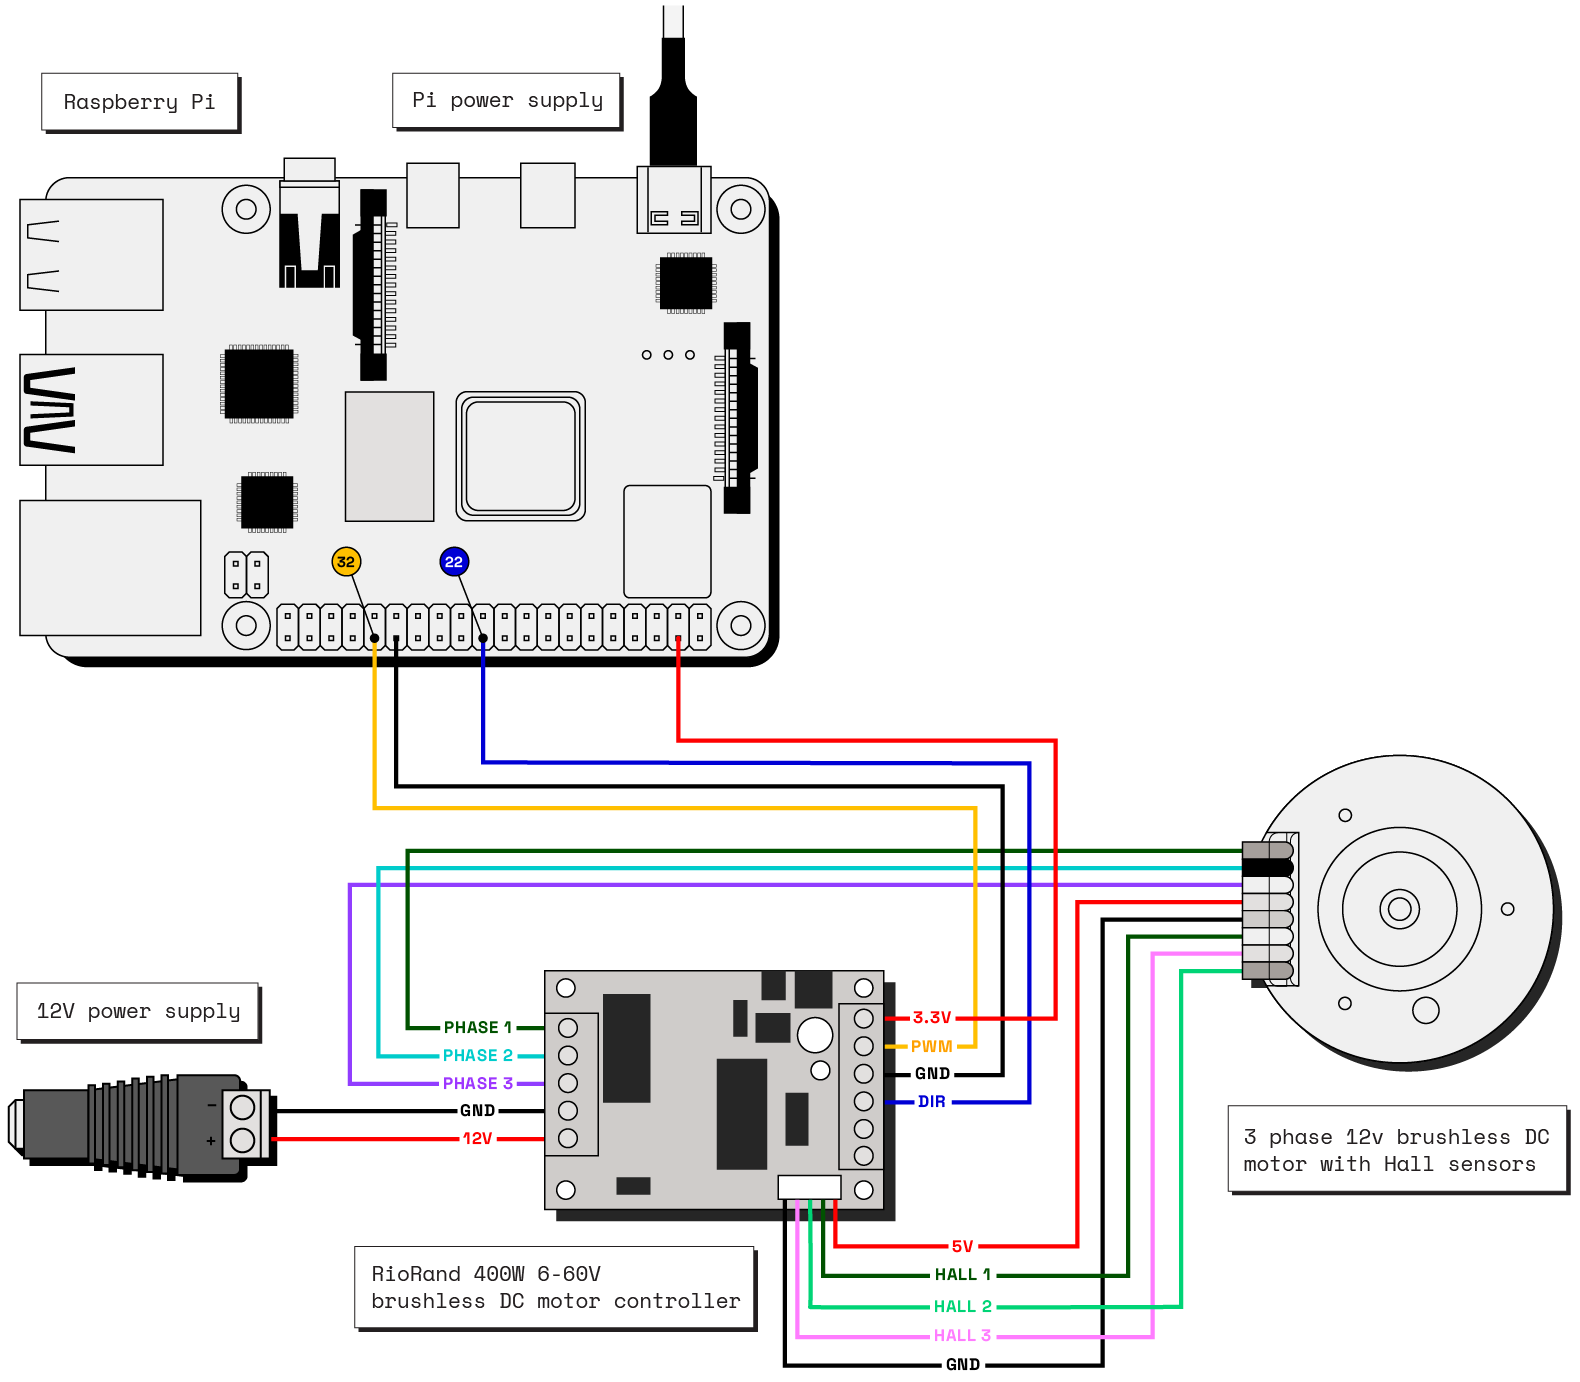 An example wiring diagram showing a Raspberry Pi, 12V power supply, RioRand 400W brushless DC motor controller, and 3 phase 12V brushless DC motor. The motor has three power wires (one for each phase) and five sensor wires (two to power the sensor and one for each of the three Hall effect sensors).